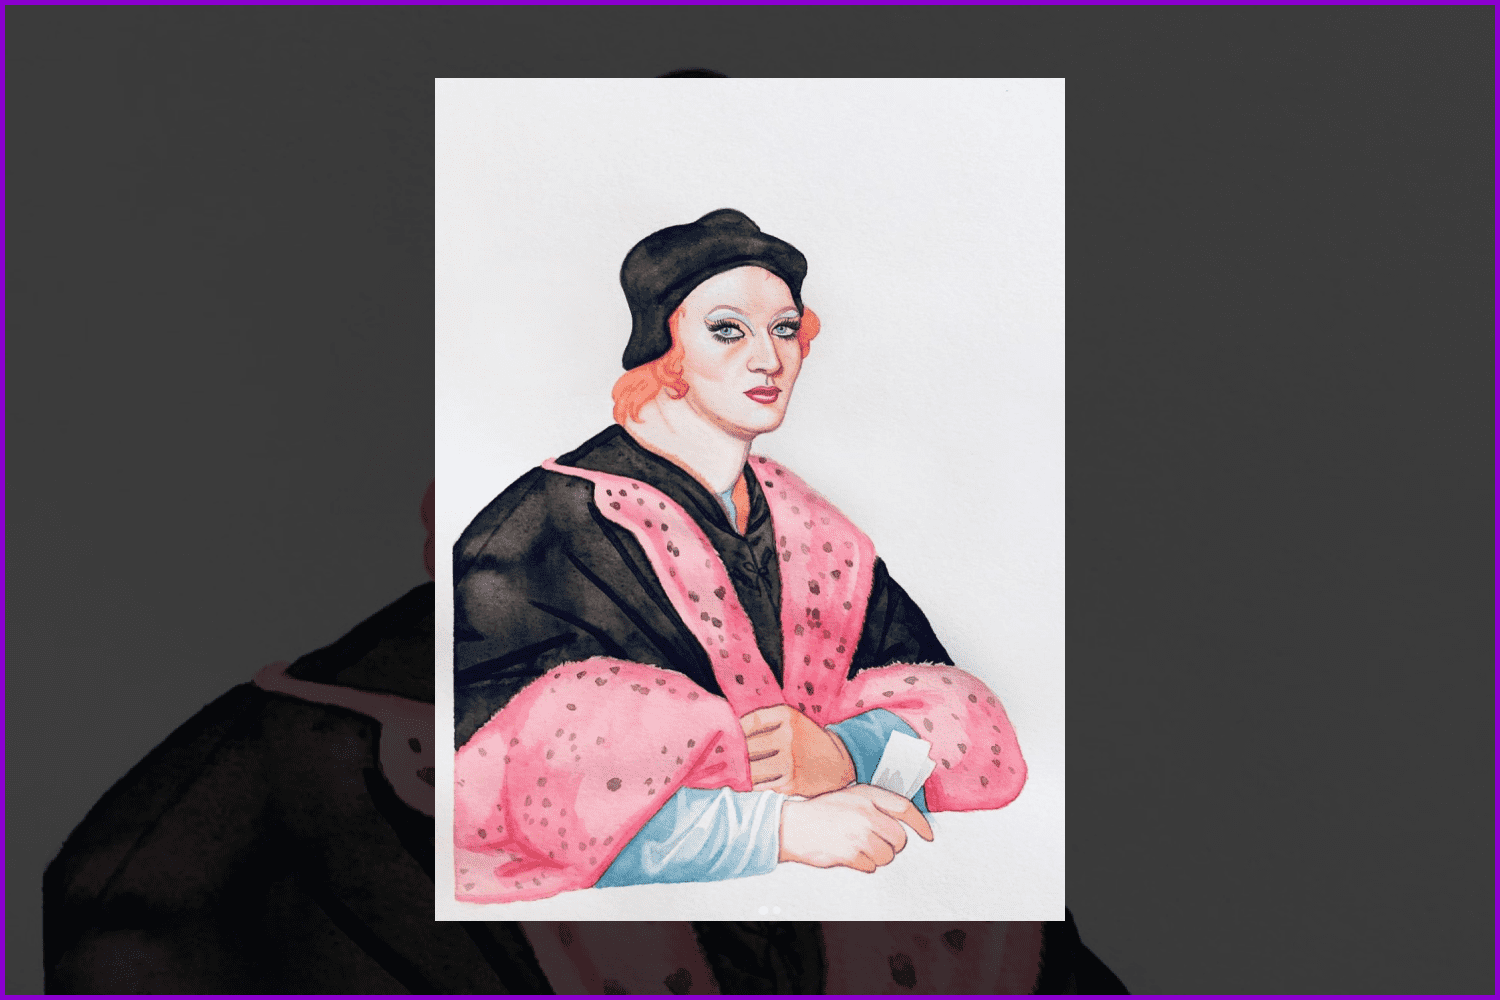 Drawing of a Renaissance man in a pink coat.